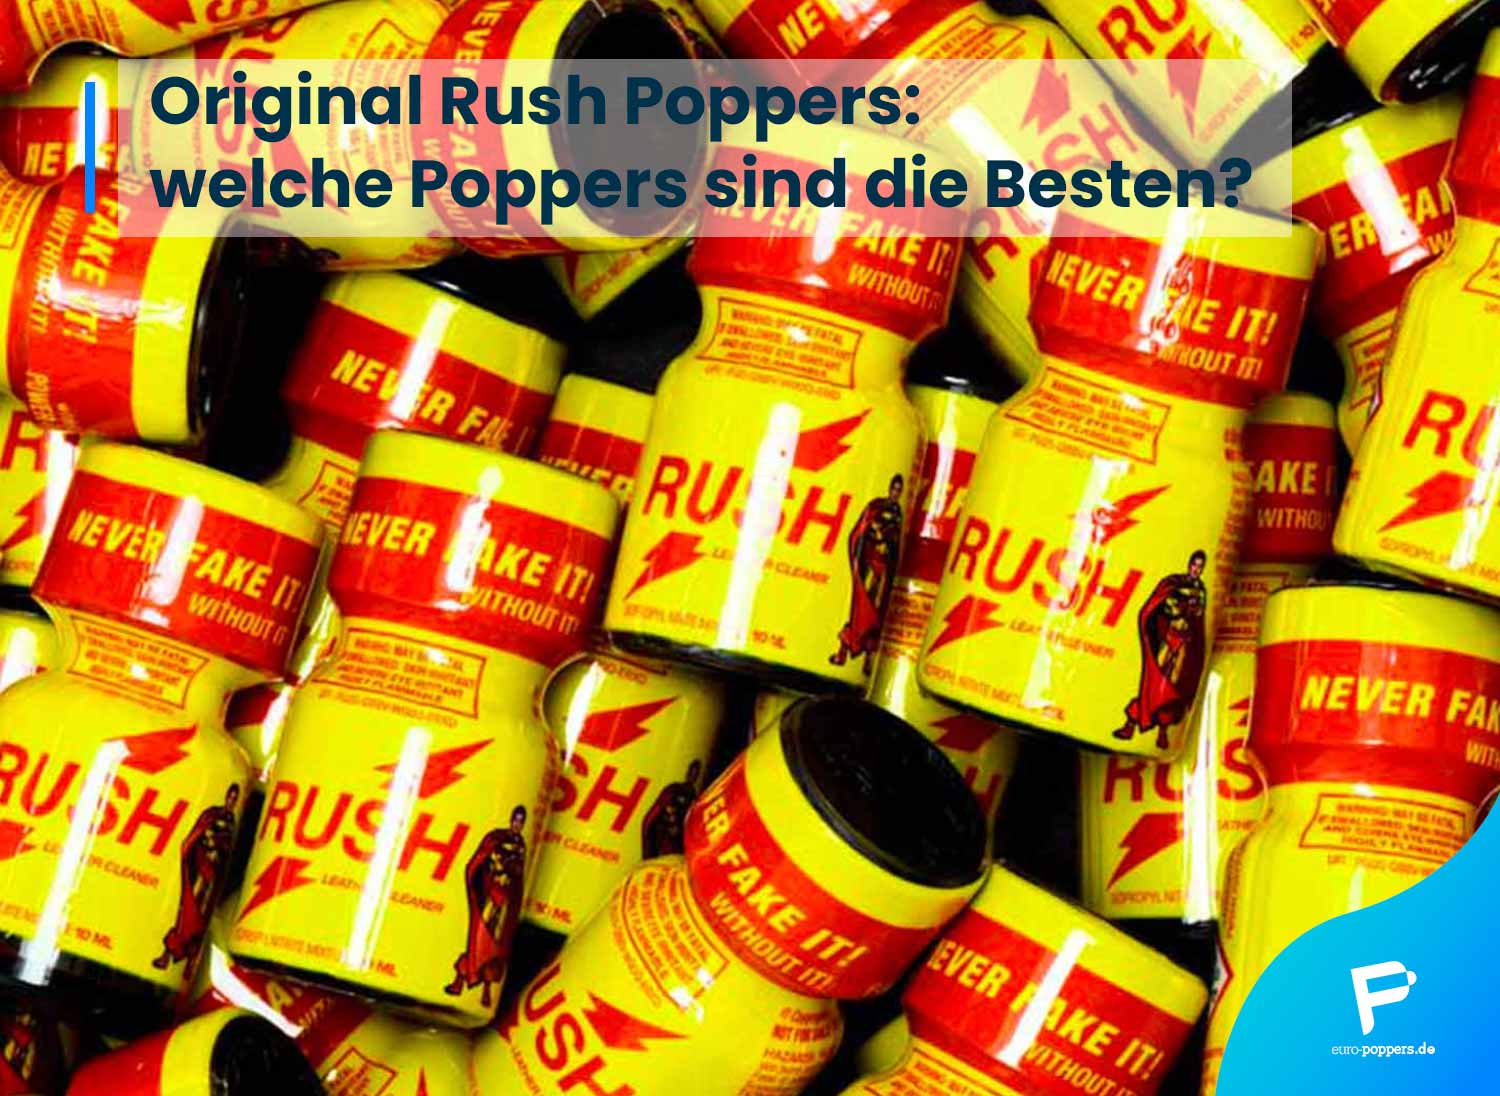 You are currently viewing Original Rush Poppers – welche Poppers sind die Besten?